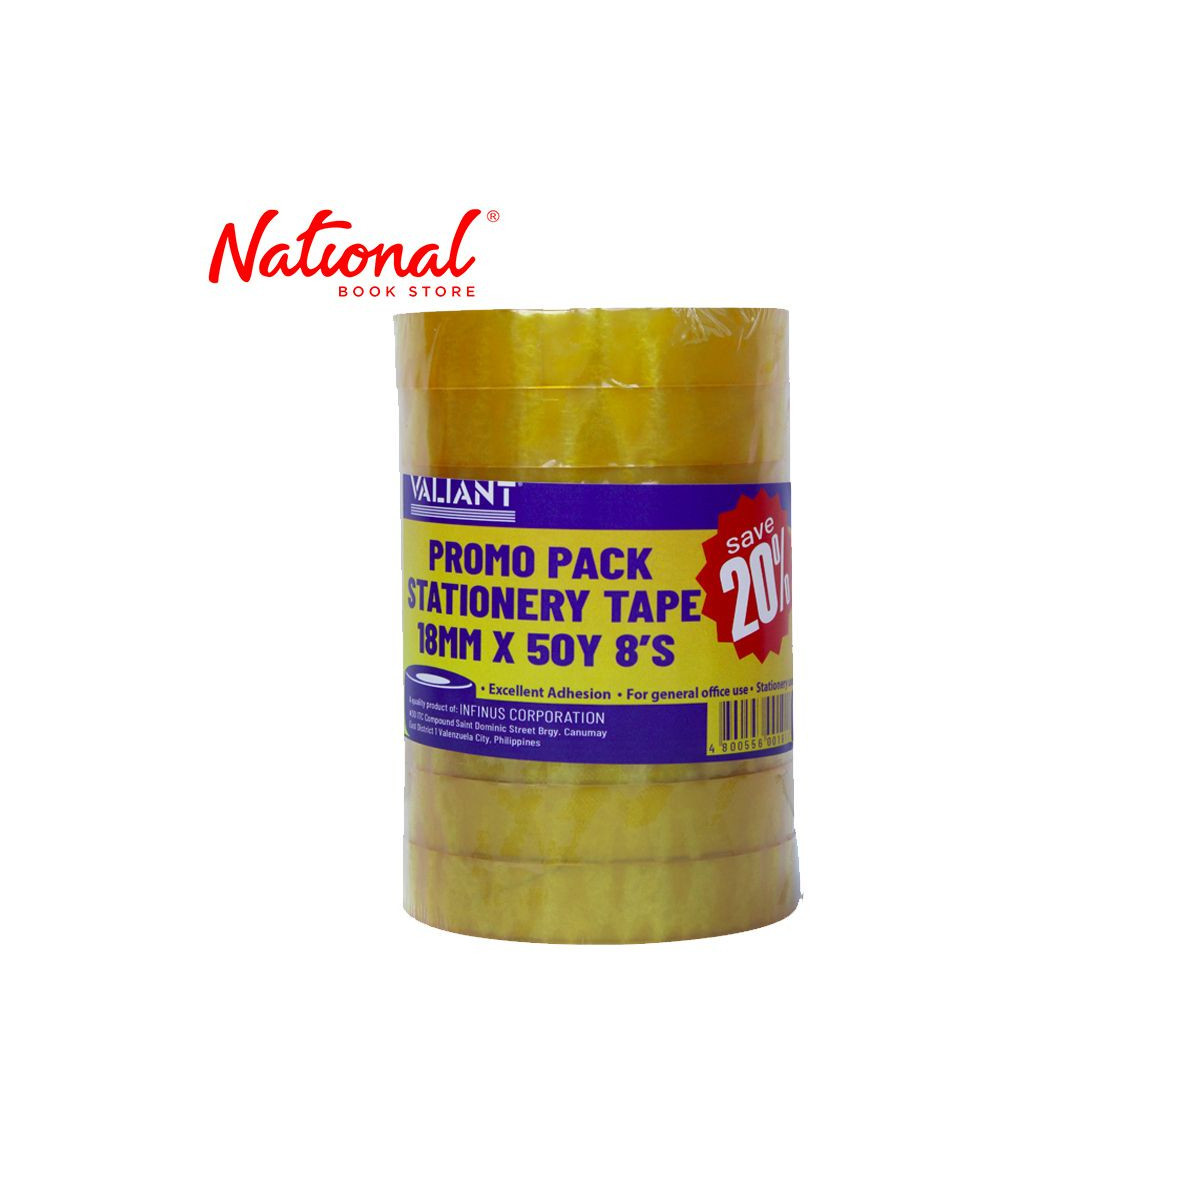 Valiant Promo Pack Adhesive Tape Big Roll 8 Pieces 18mmX50y - Adhesives - School & Office Essentials